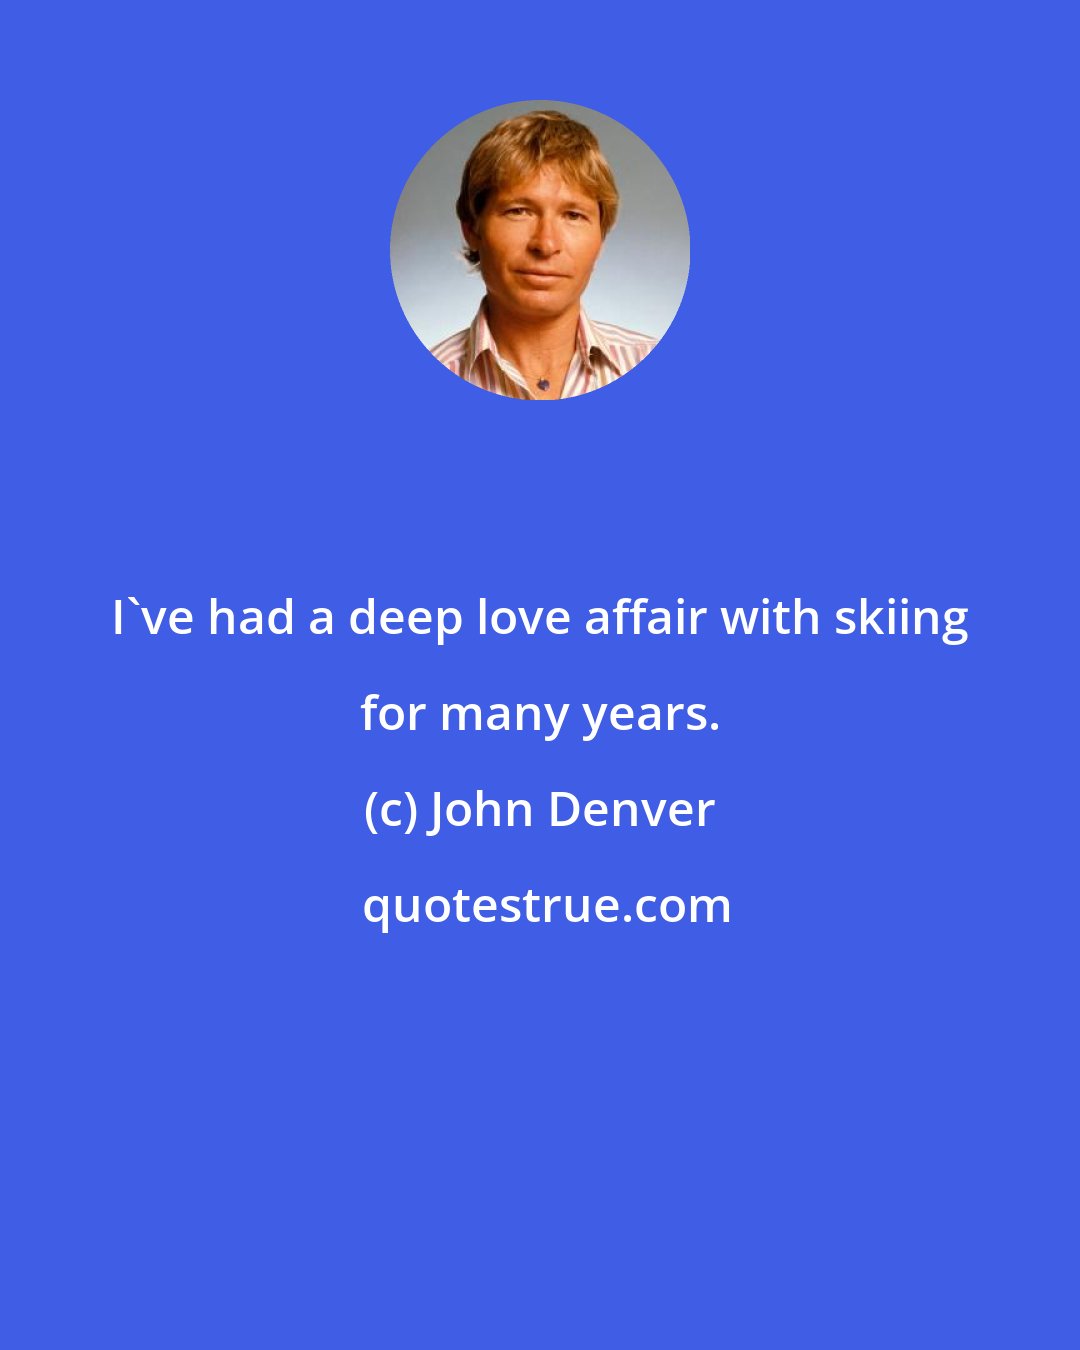 John Denver: I've had a deep love affair with skiing for many years.